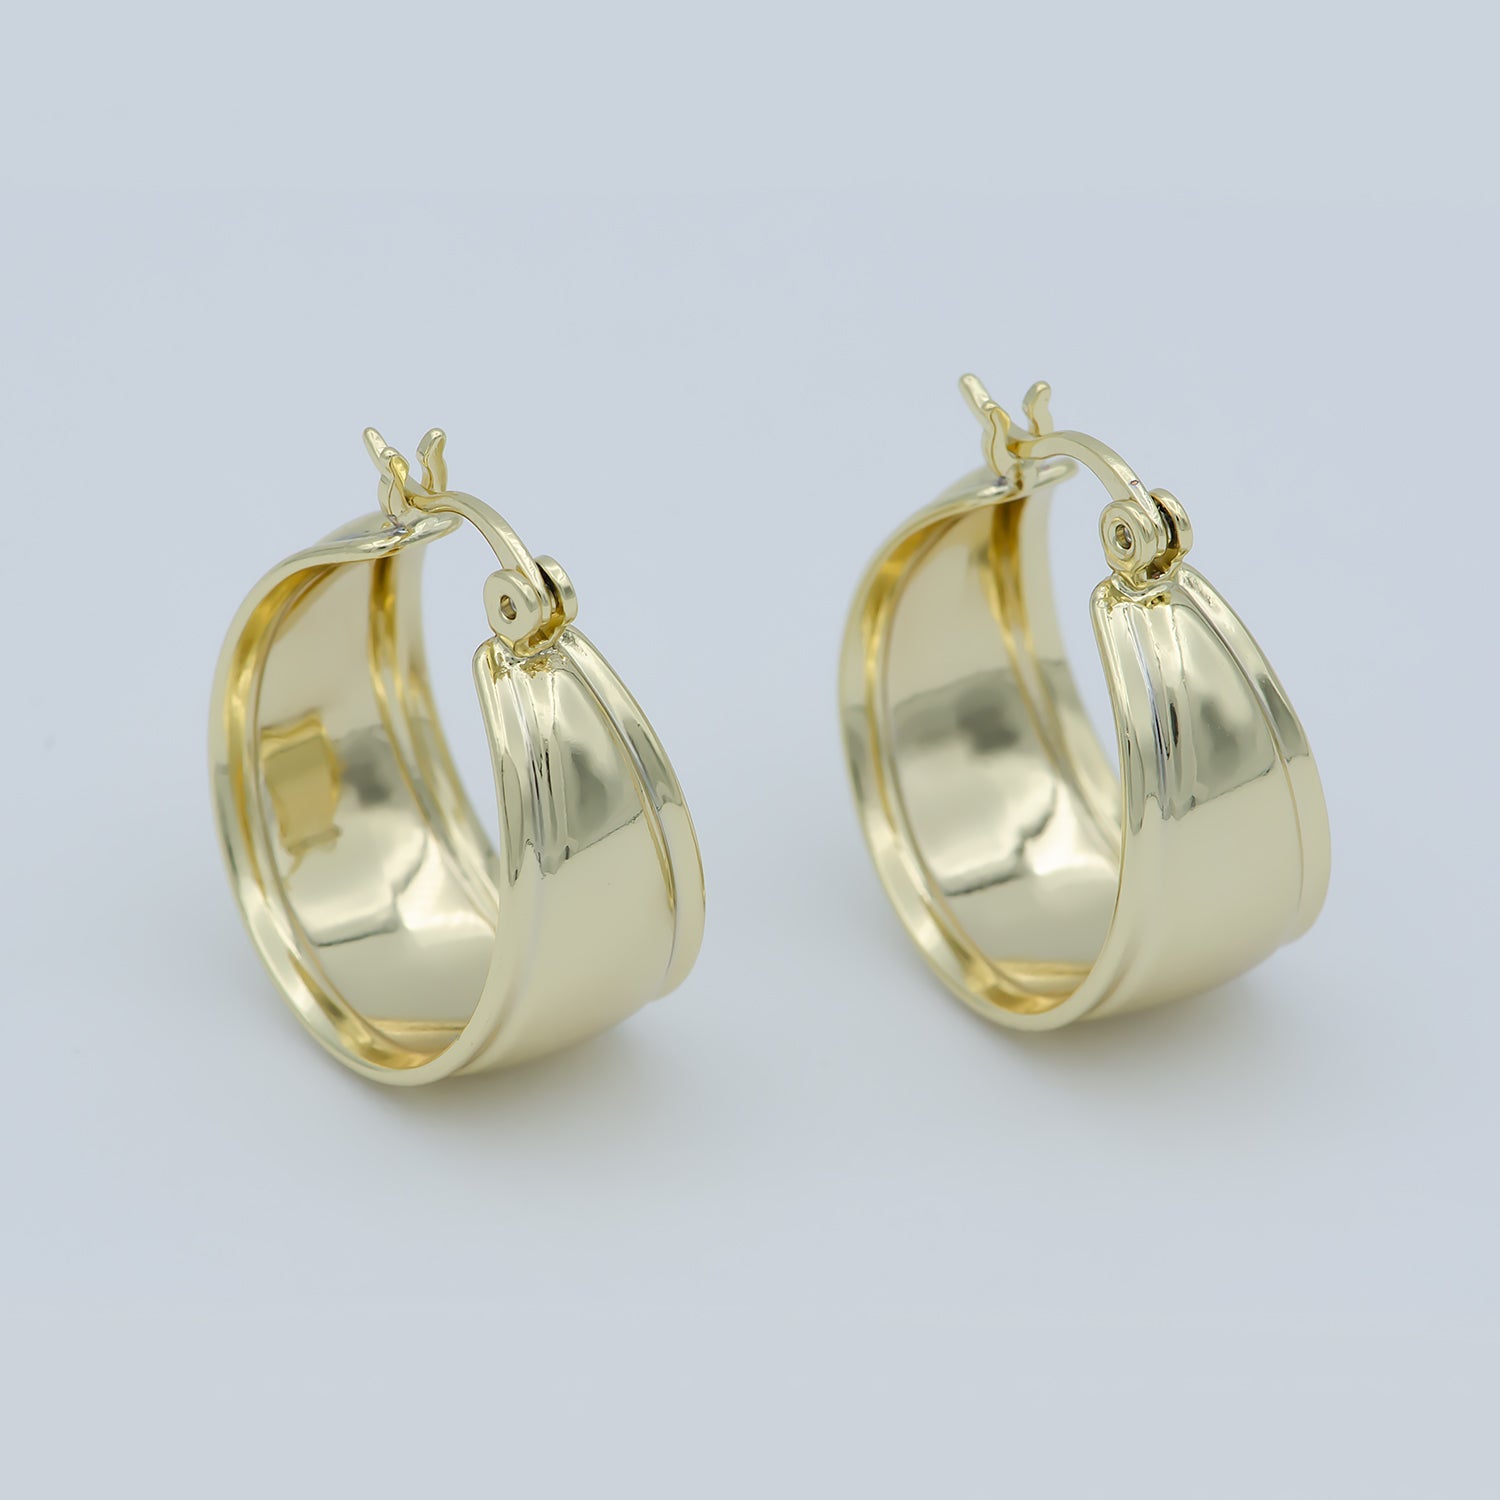 1pair Golden Simple Round Huggies Earrings, Plain Gold Filled Geometric Formal/Casual Daily Wear Earring Jewelry P256 - DLUXCA